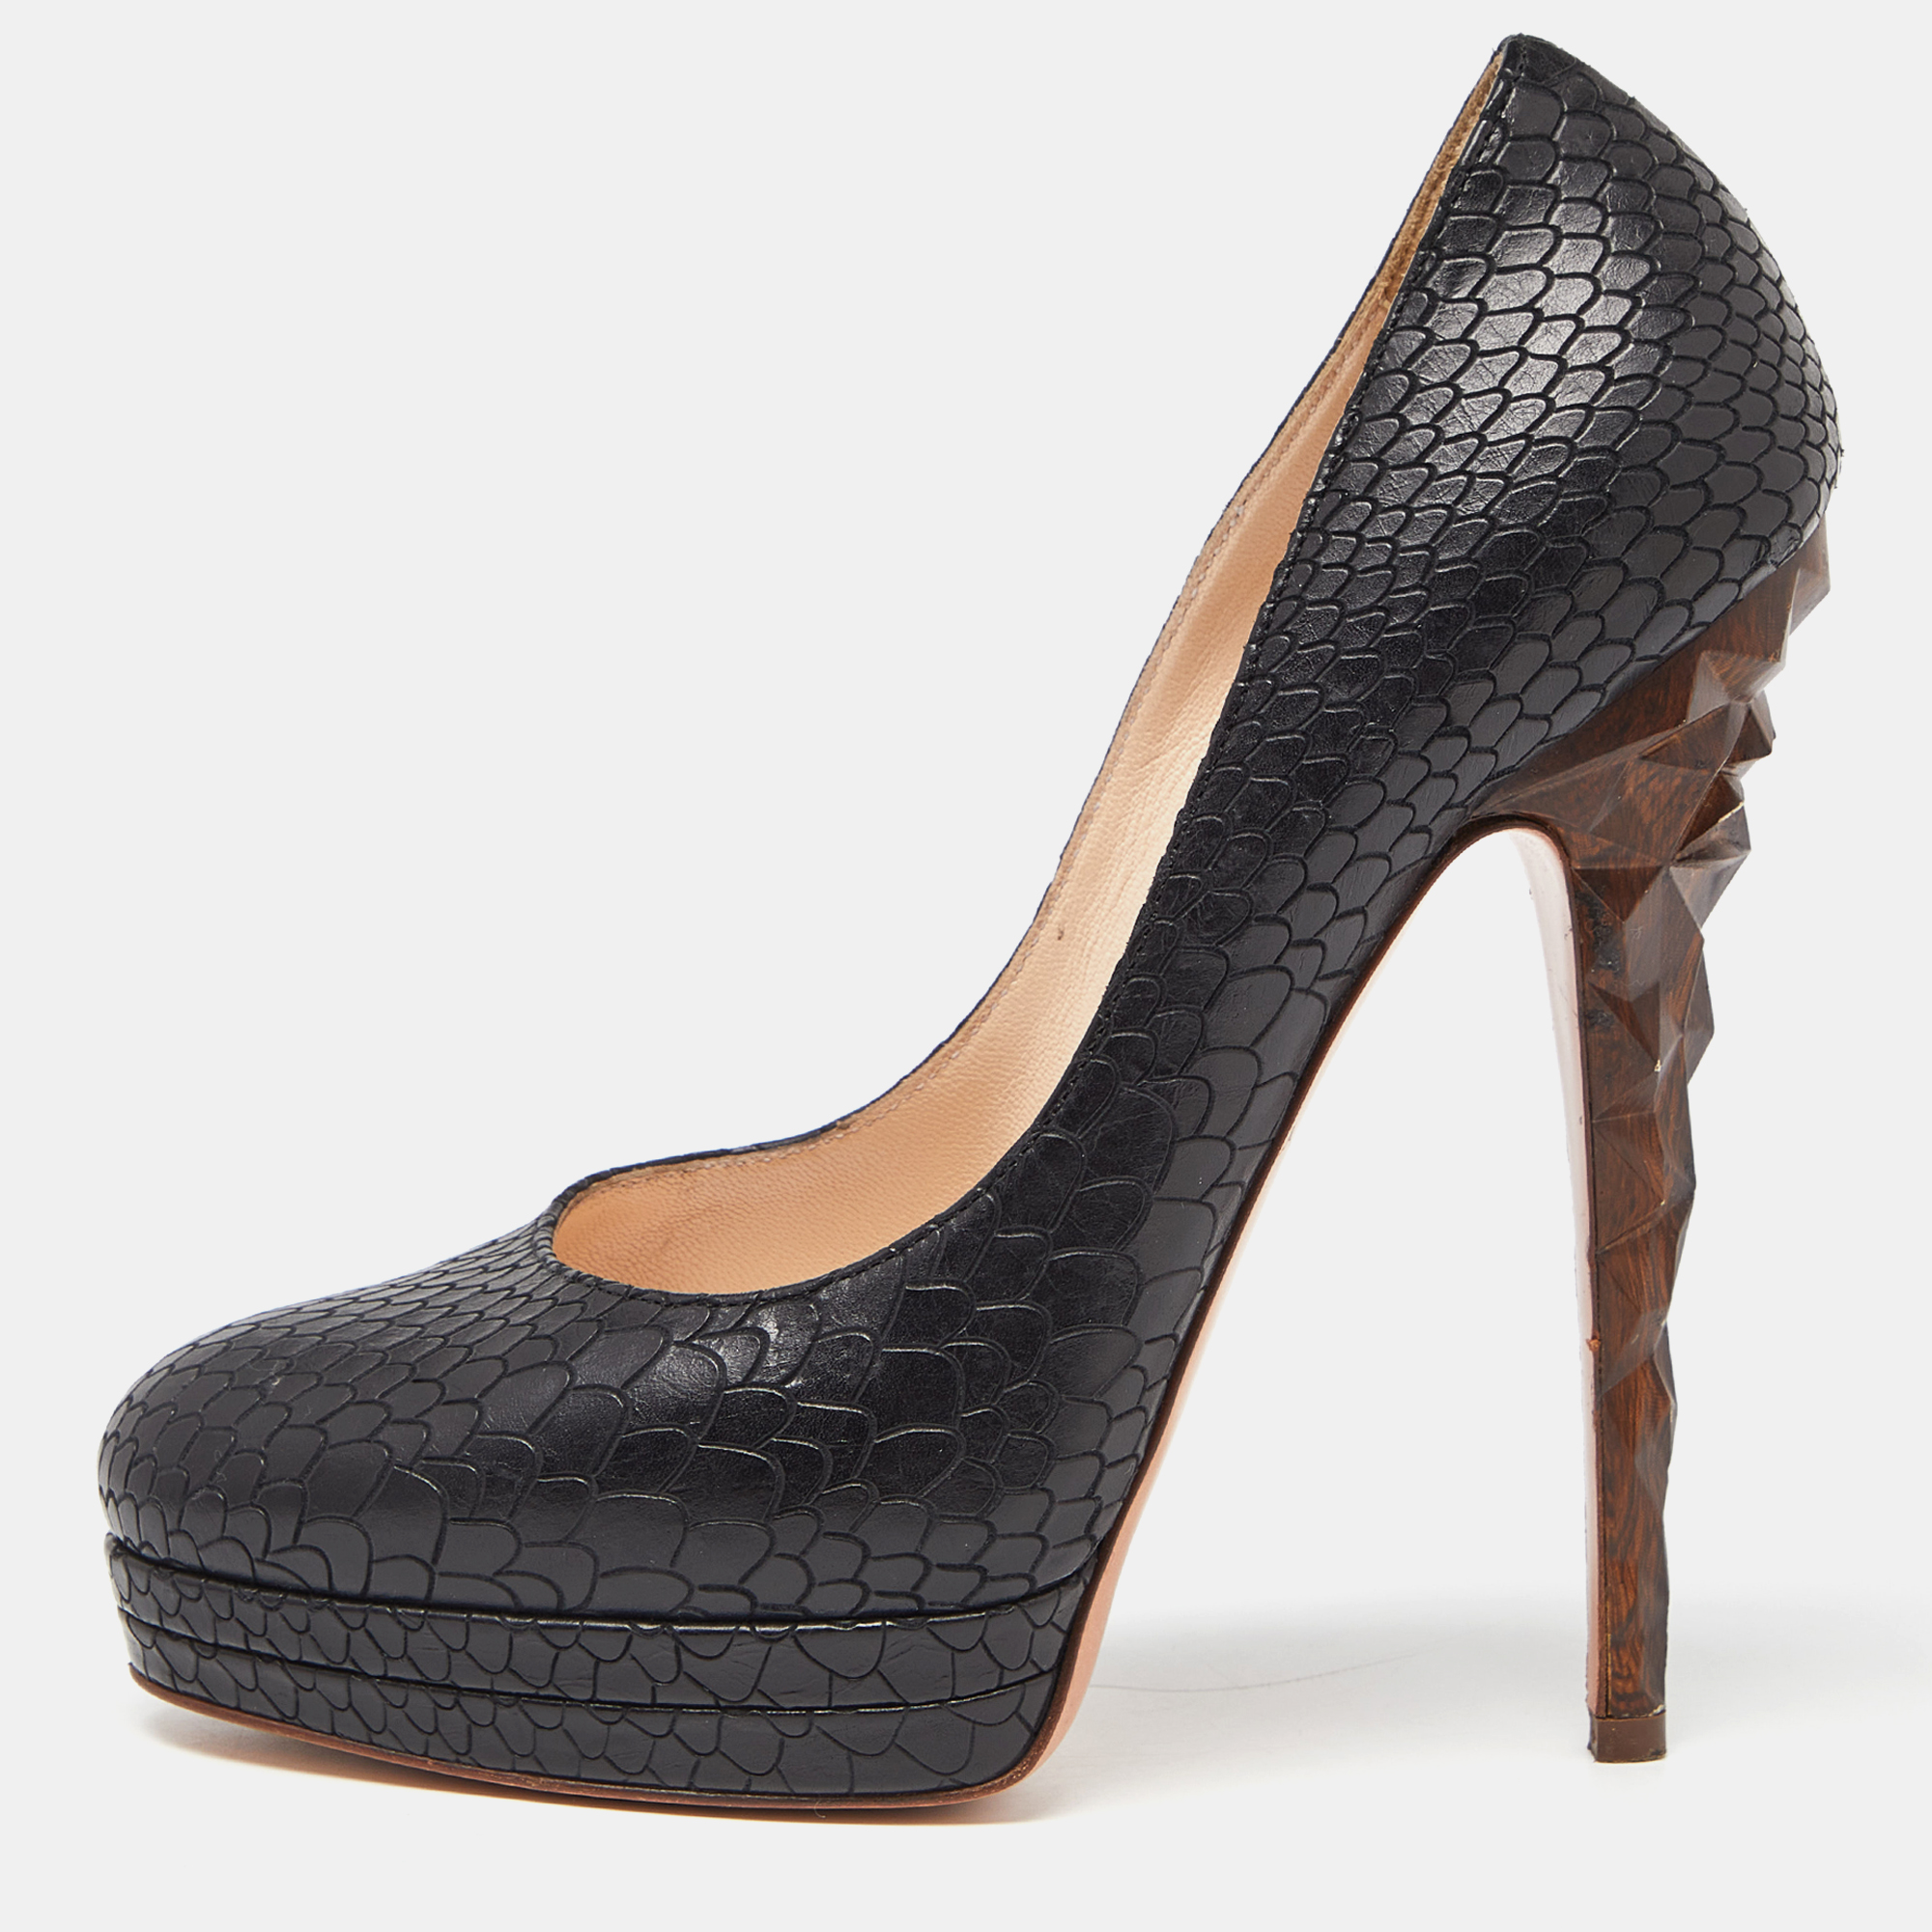 Make the streets your fashion runway with these spectacular pumps from Casadei. Chic in black these pumps are crafted from python embossed leather exterior. They flaunt solid platforms sculpted high heels and comfortable leather lined insoles.